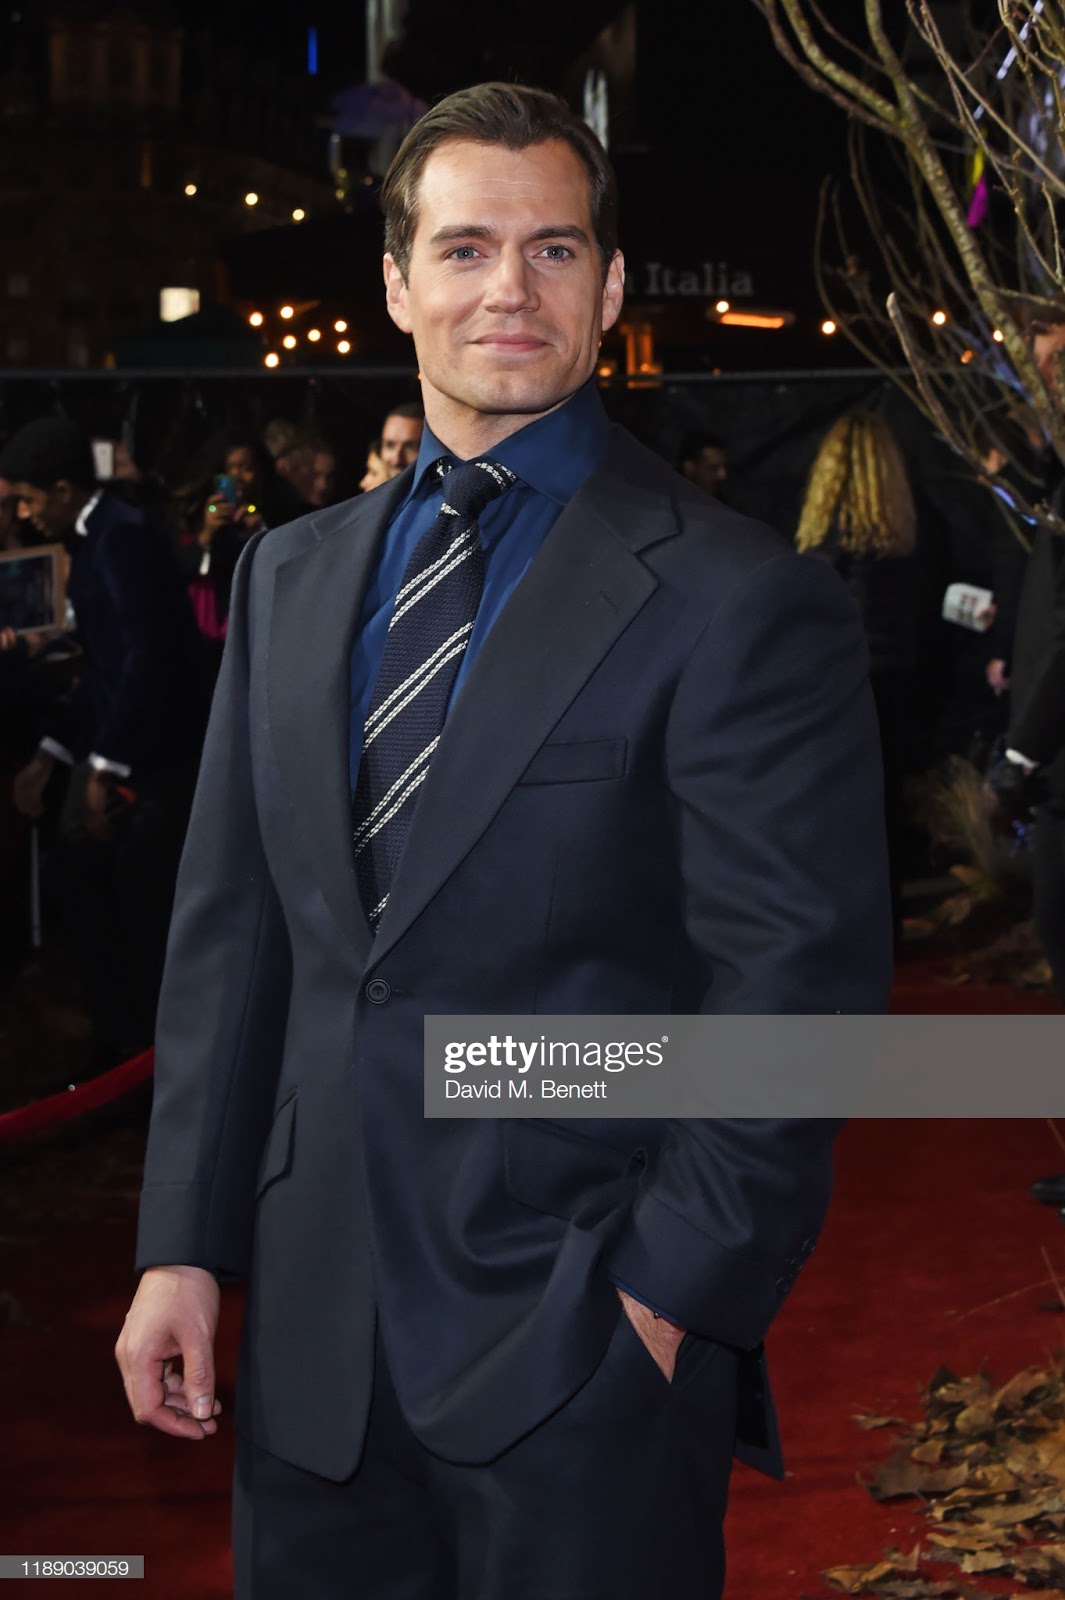 Henry Cavill News: 'The Witcher' London Premiere: All Pics & Videos